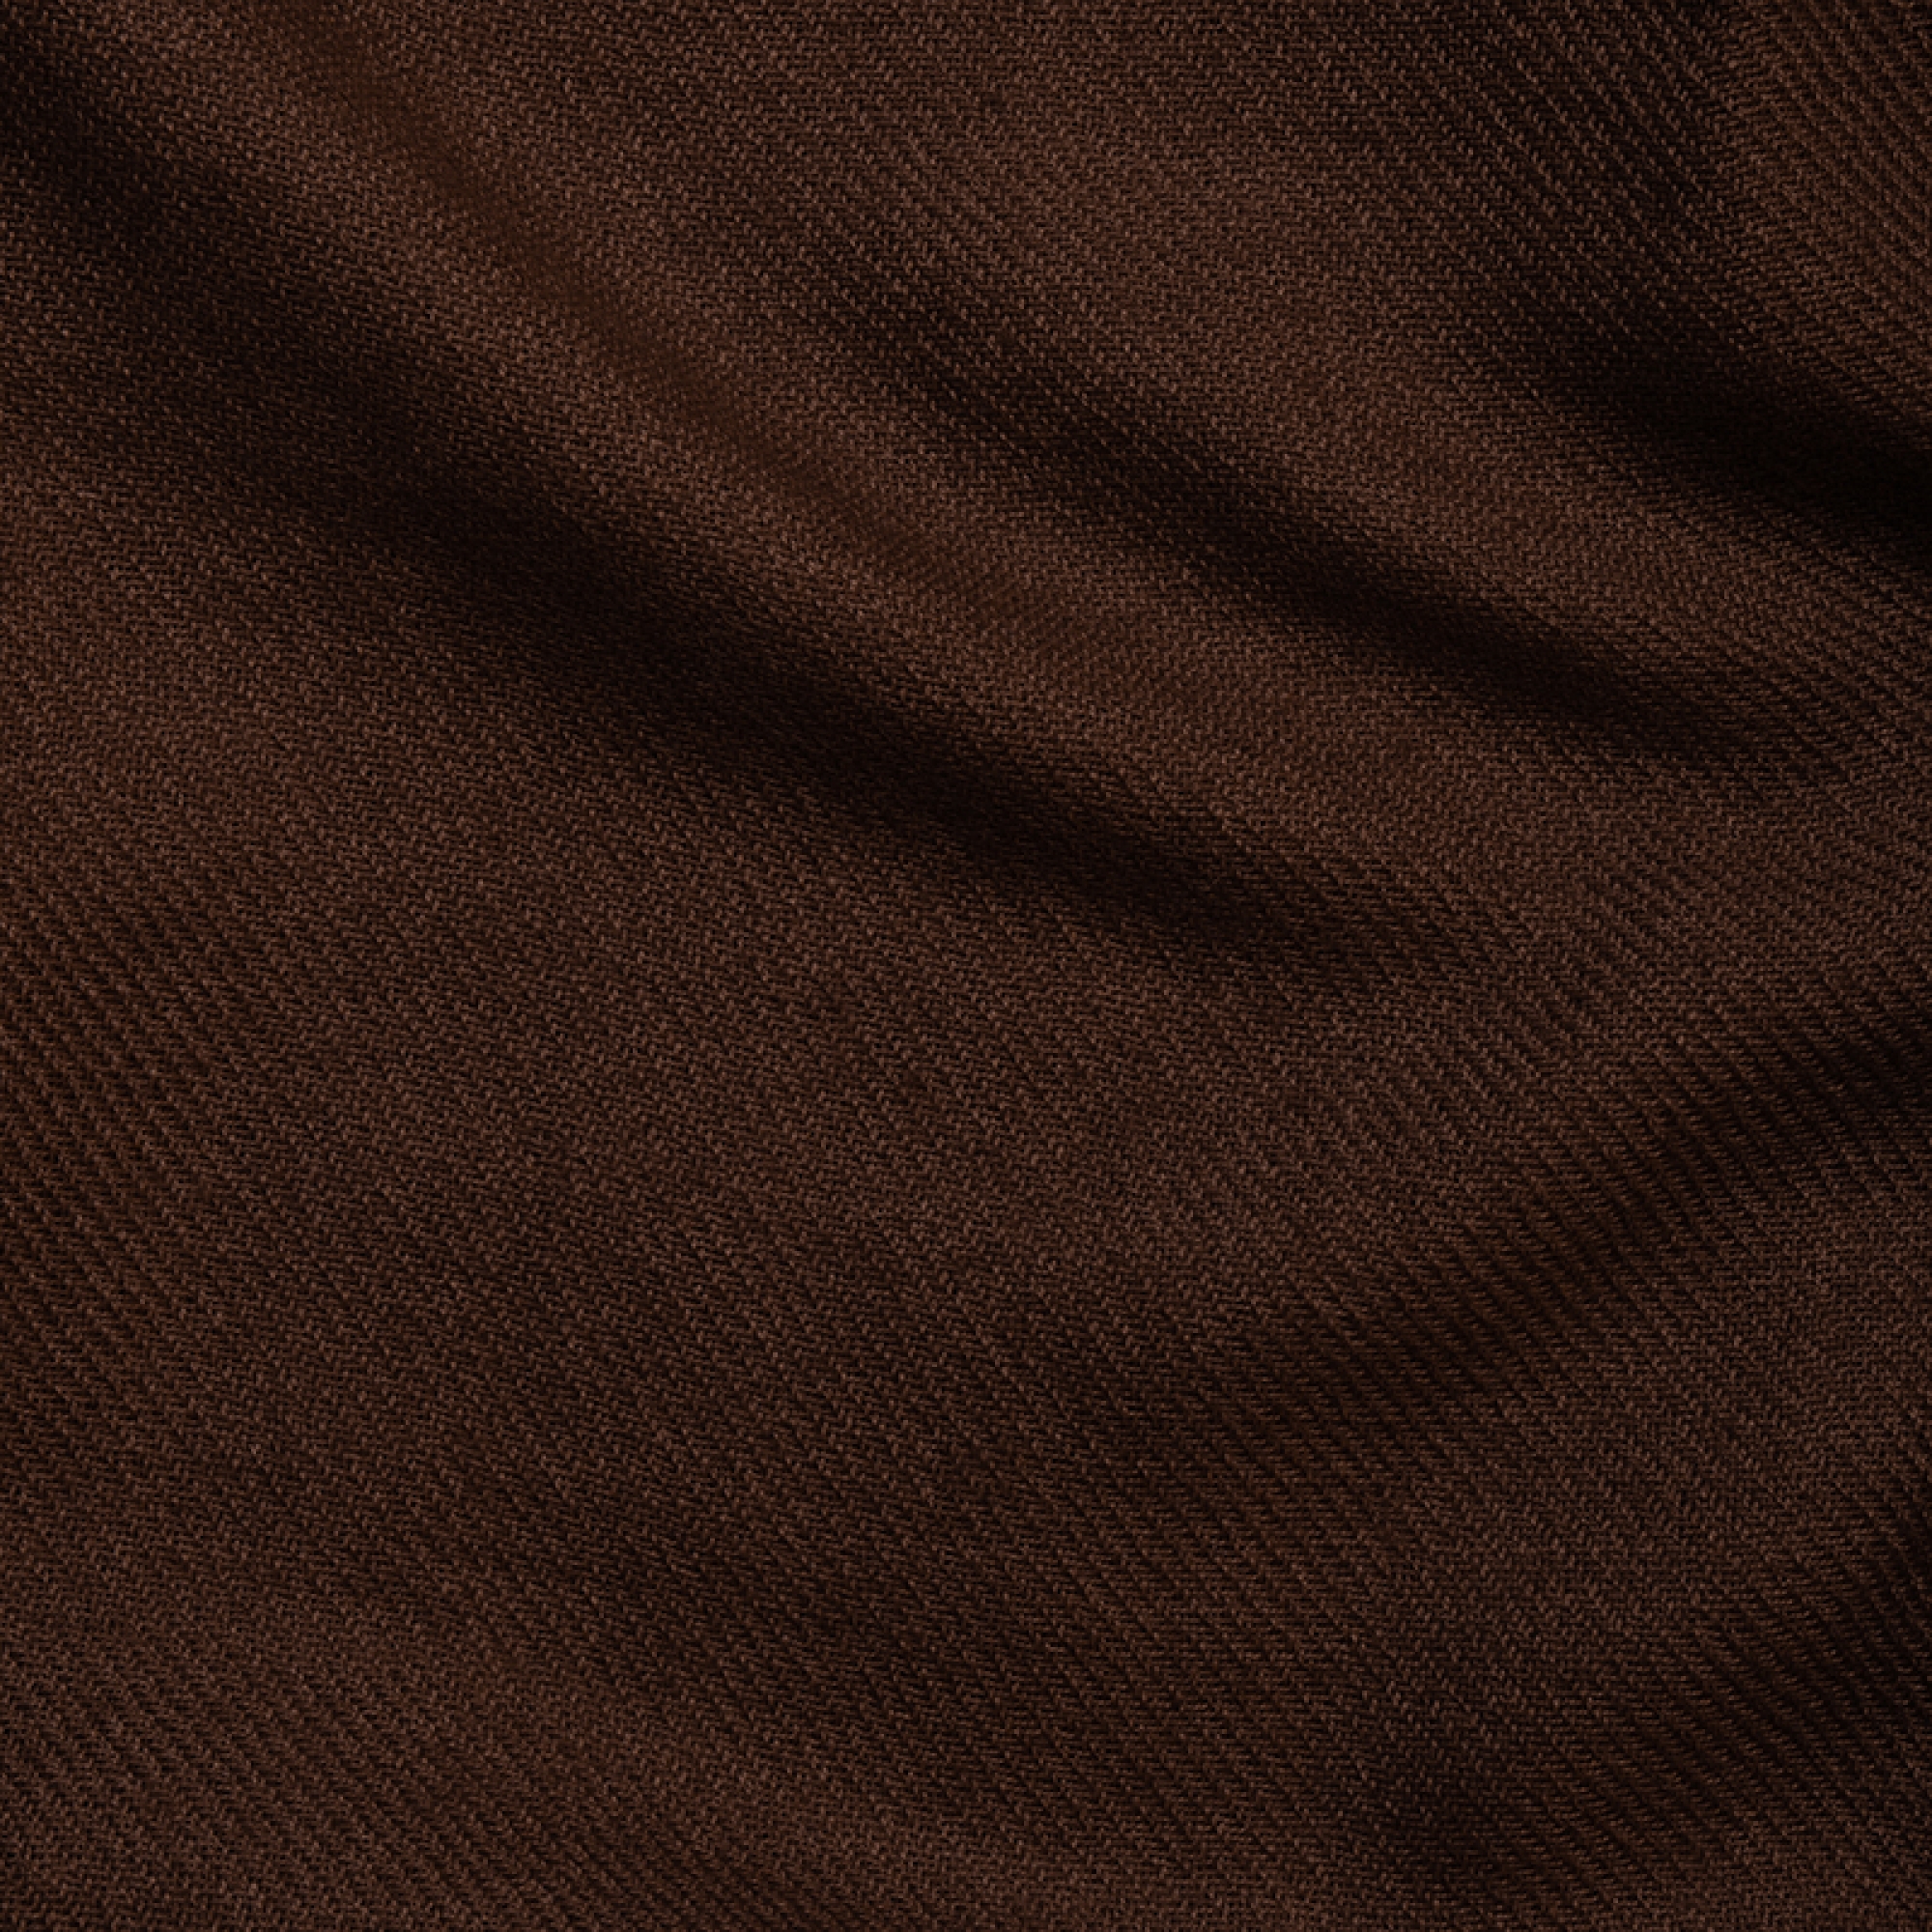 Cashmere accessories cocooning toodoo plain s 140 x 200 cacao 140 x 200 cm